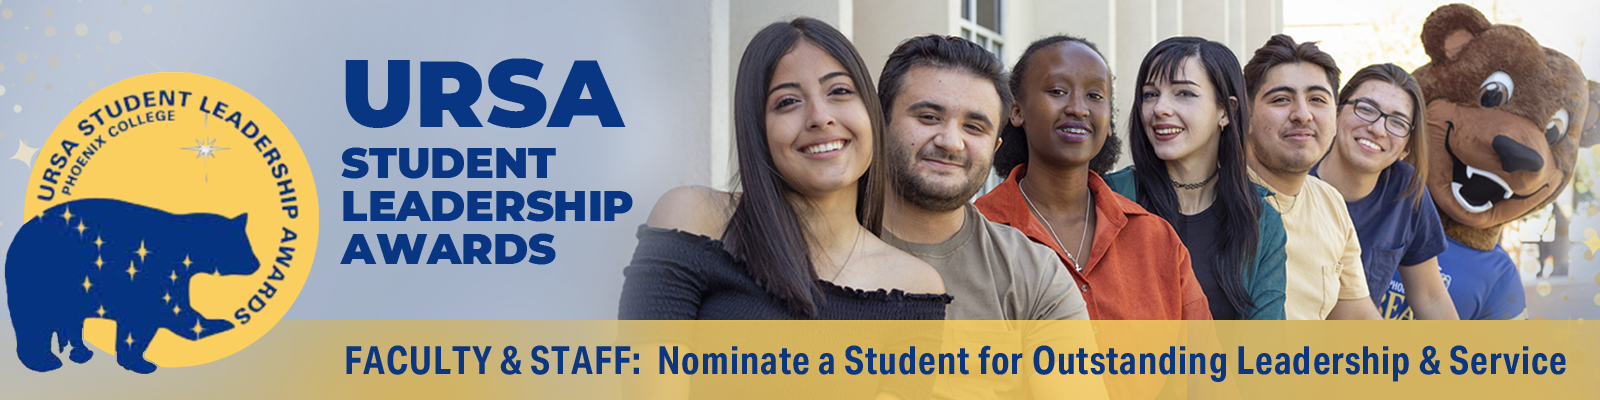 PC Faculty and Staff, Nominate a Student Leader for the Ursa Awards!